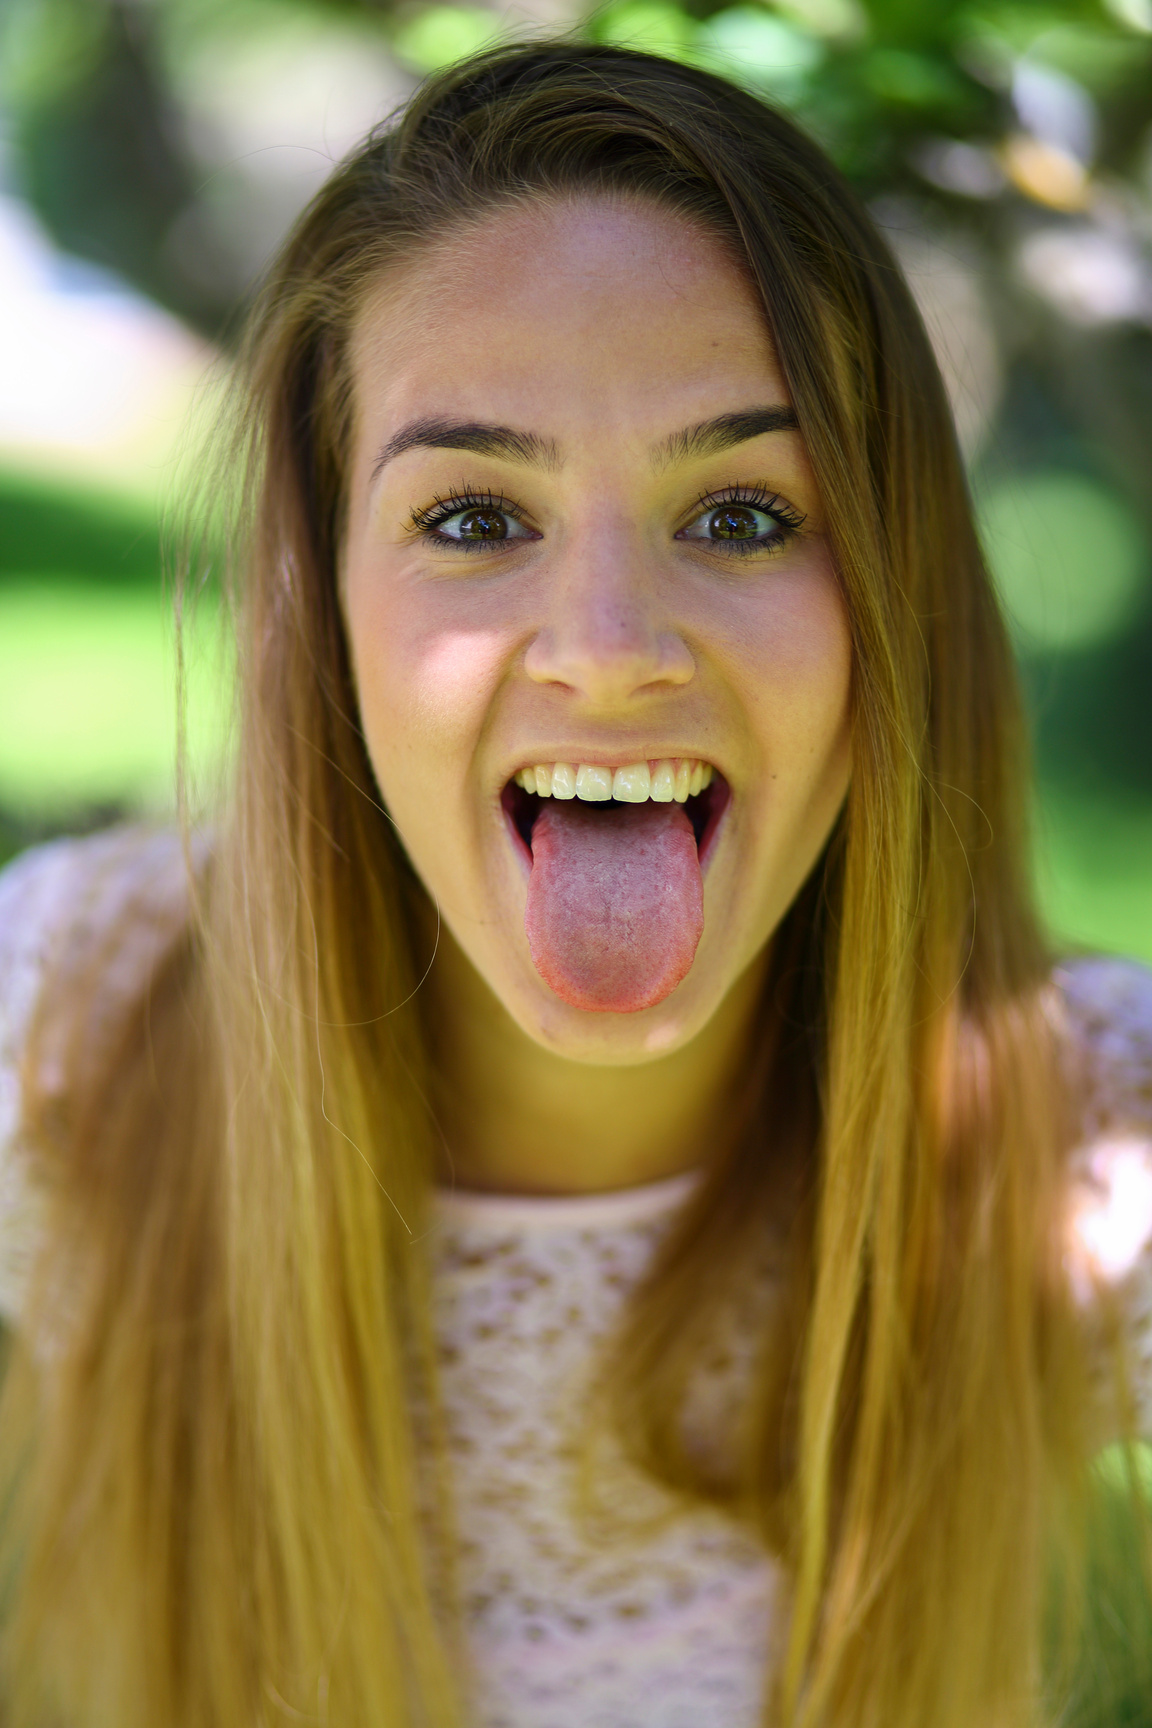 Young girl sticking out tounge